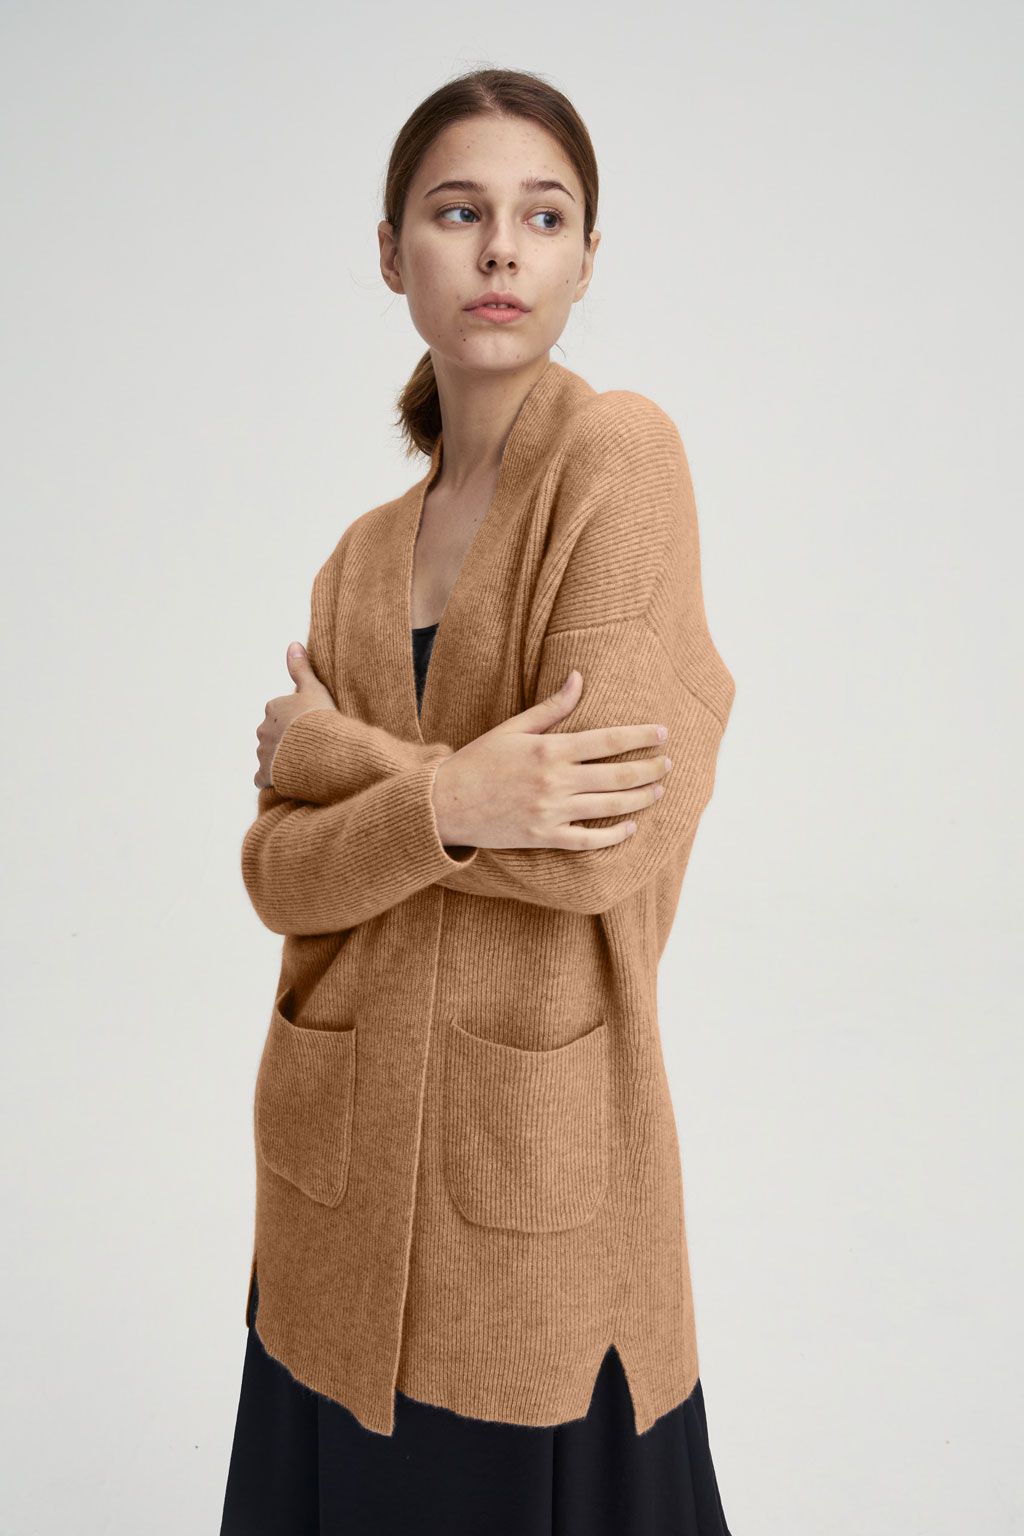 Open Front Camel Hair Cardigan